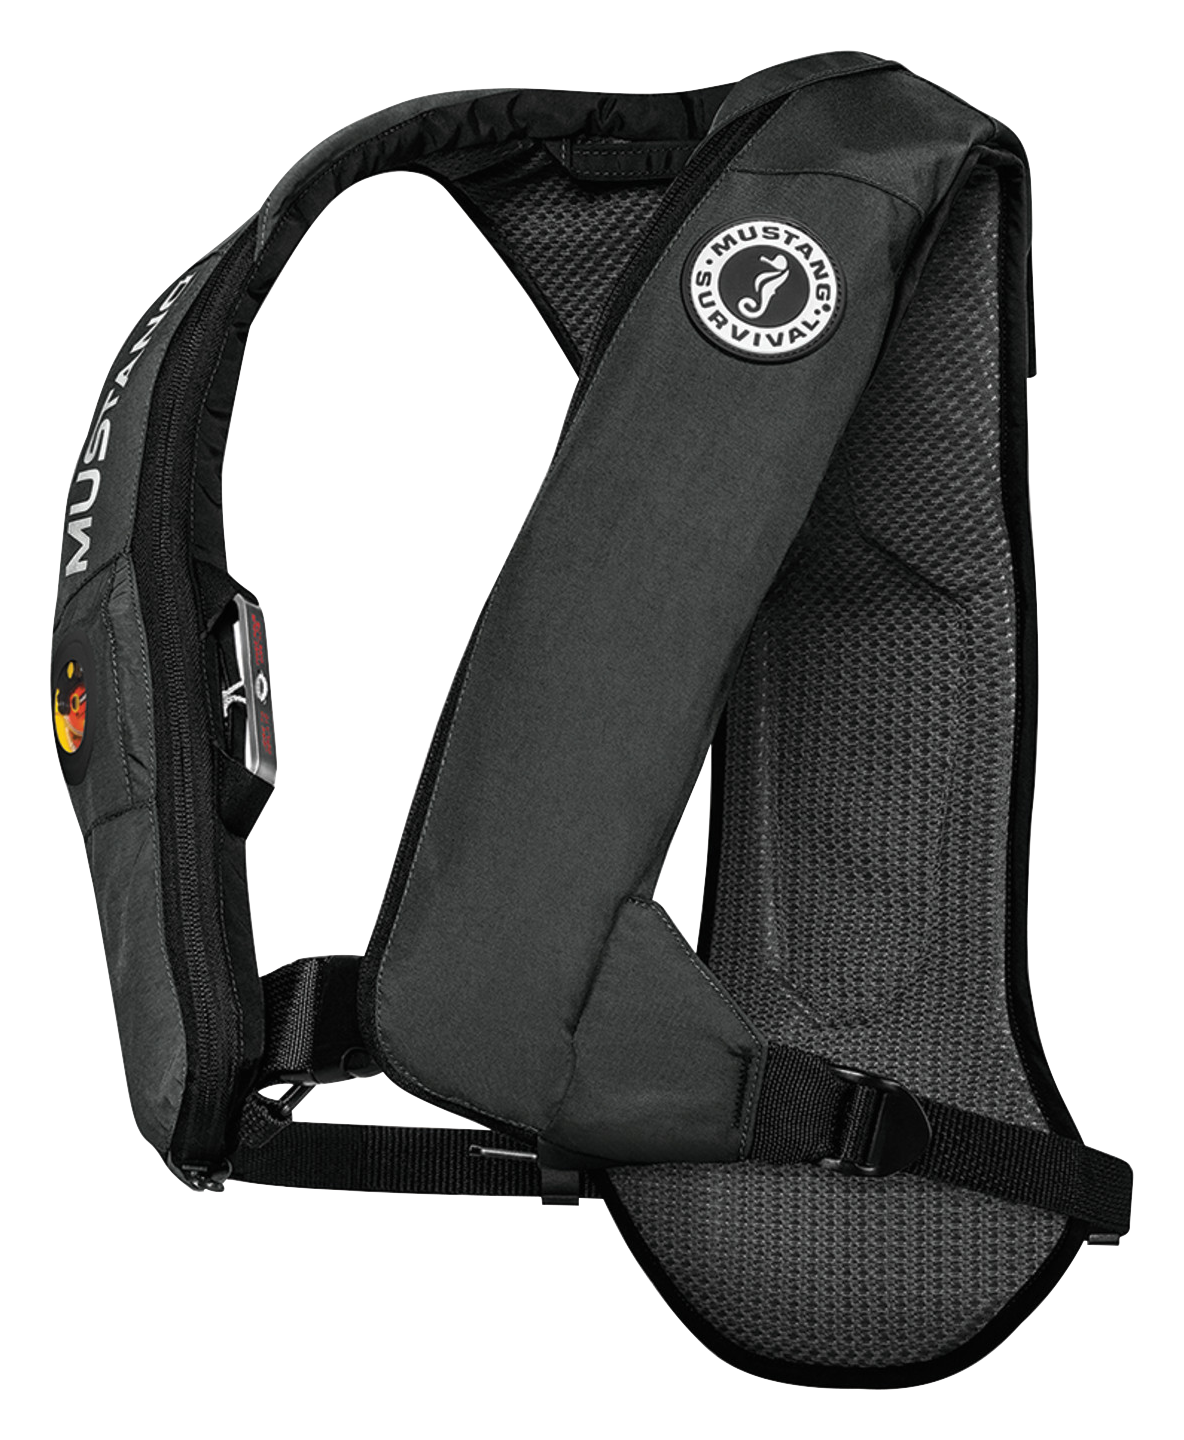 Mustang Survival Elite 28 Inflatable Life Vest with HIT - Black